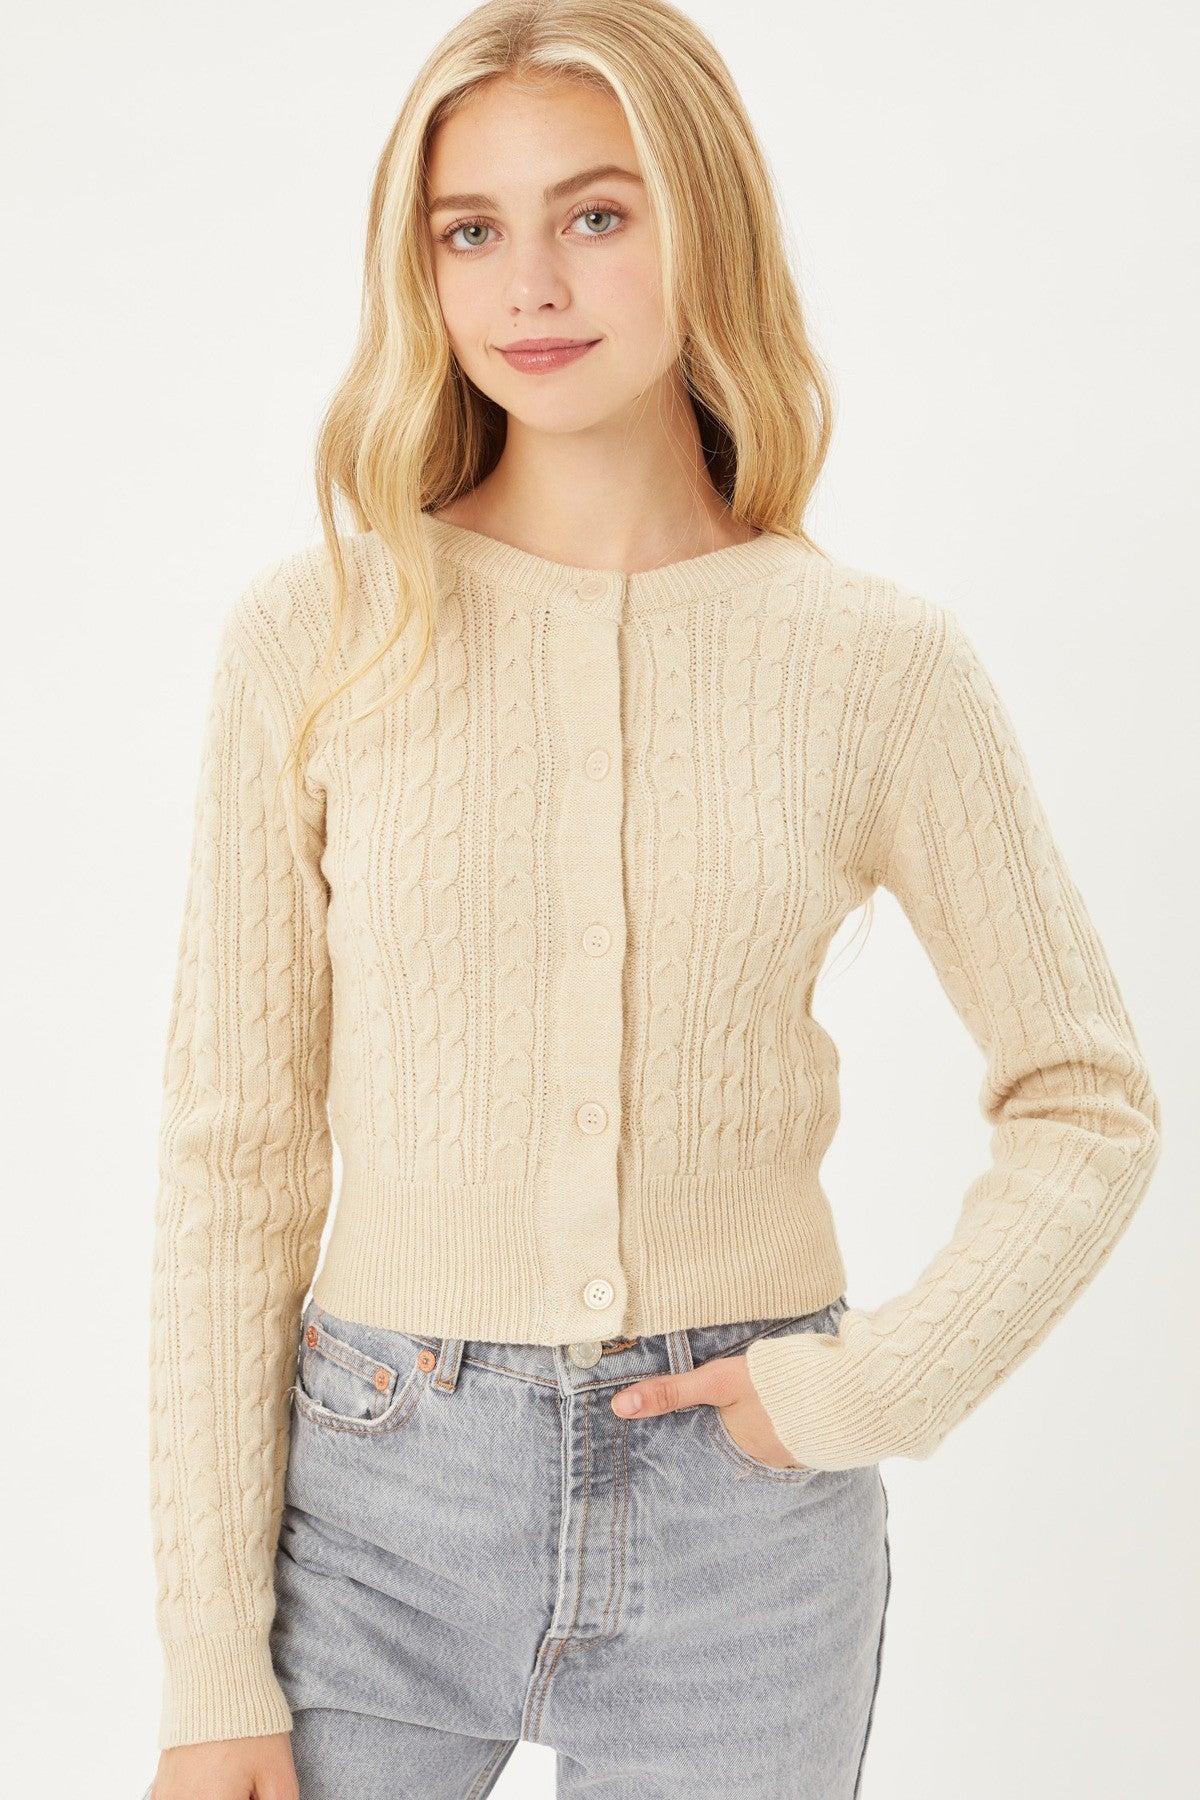 Buttoned Cable Knit Cardigan Long Sleeve Sweater - Tigbuls Variety Fashion